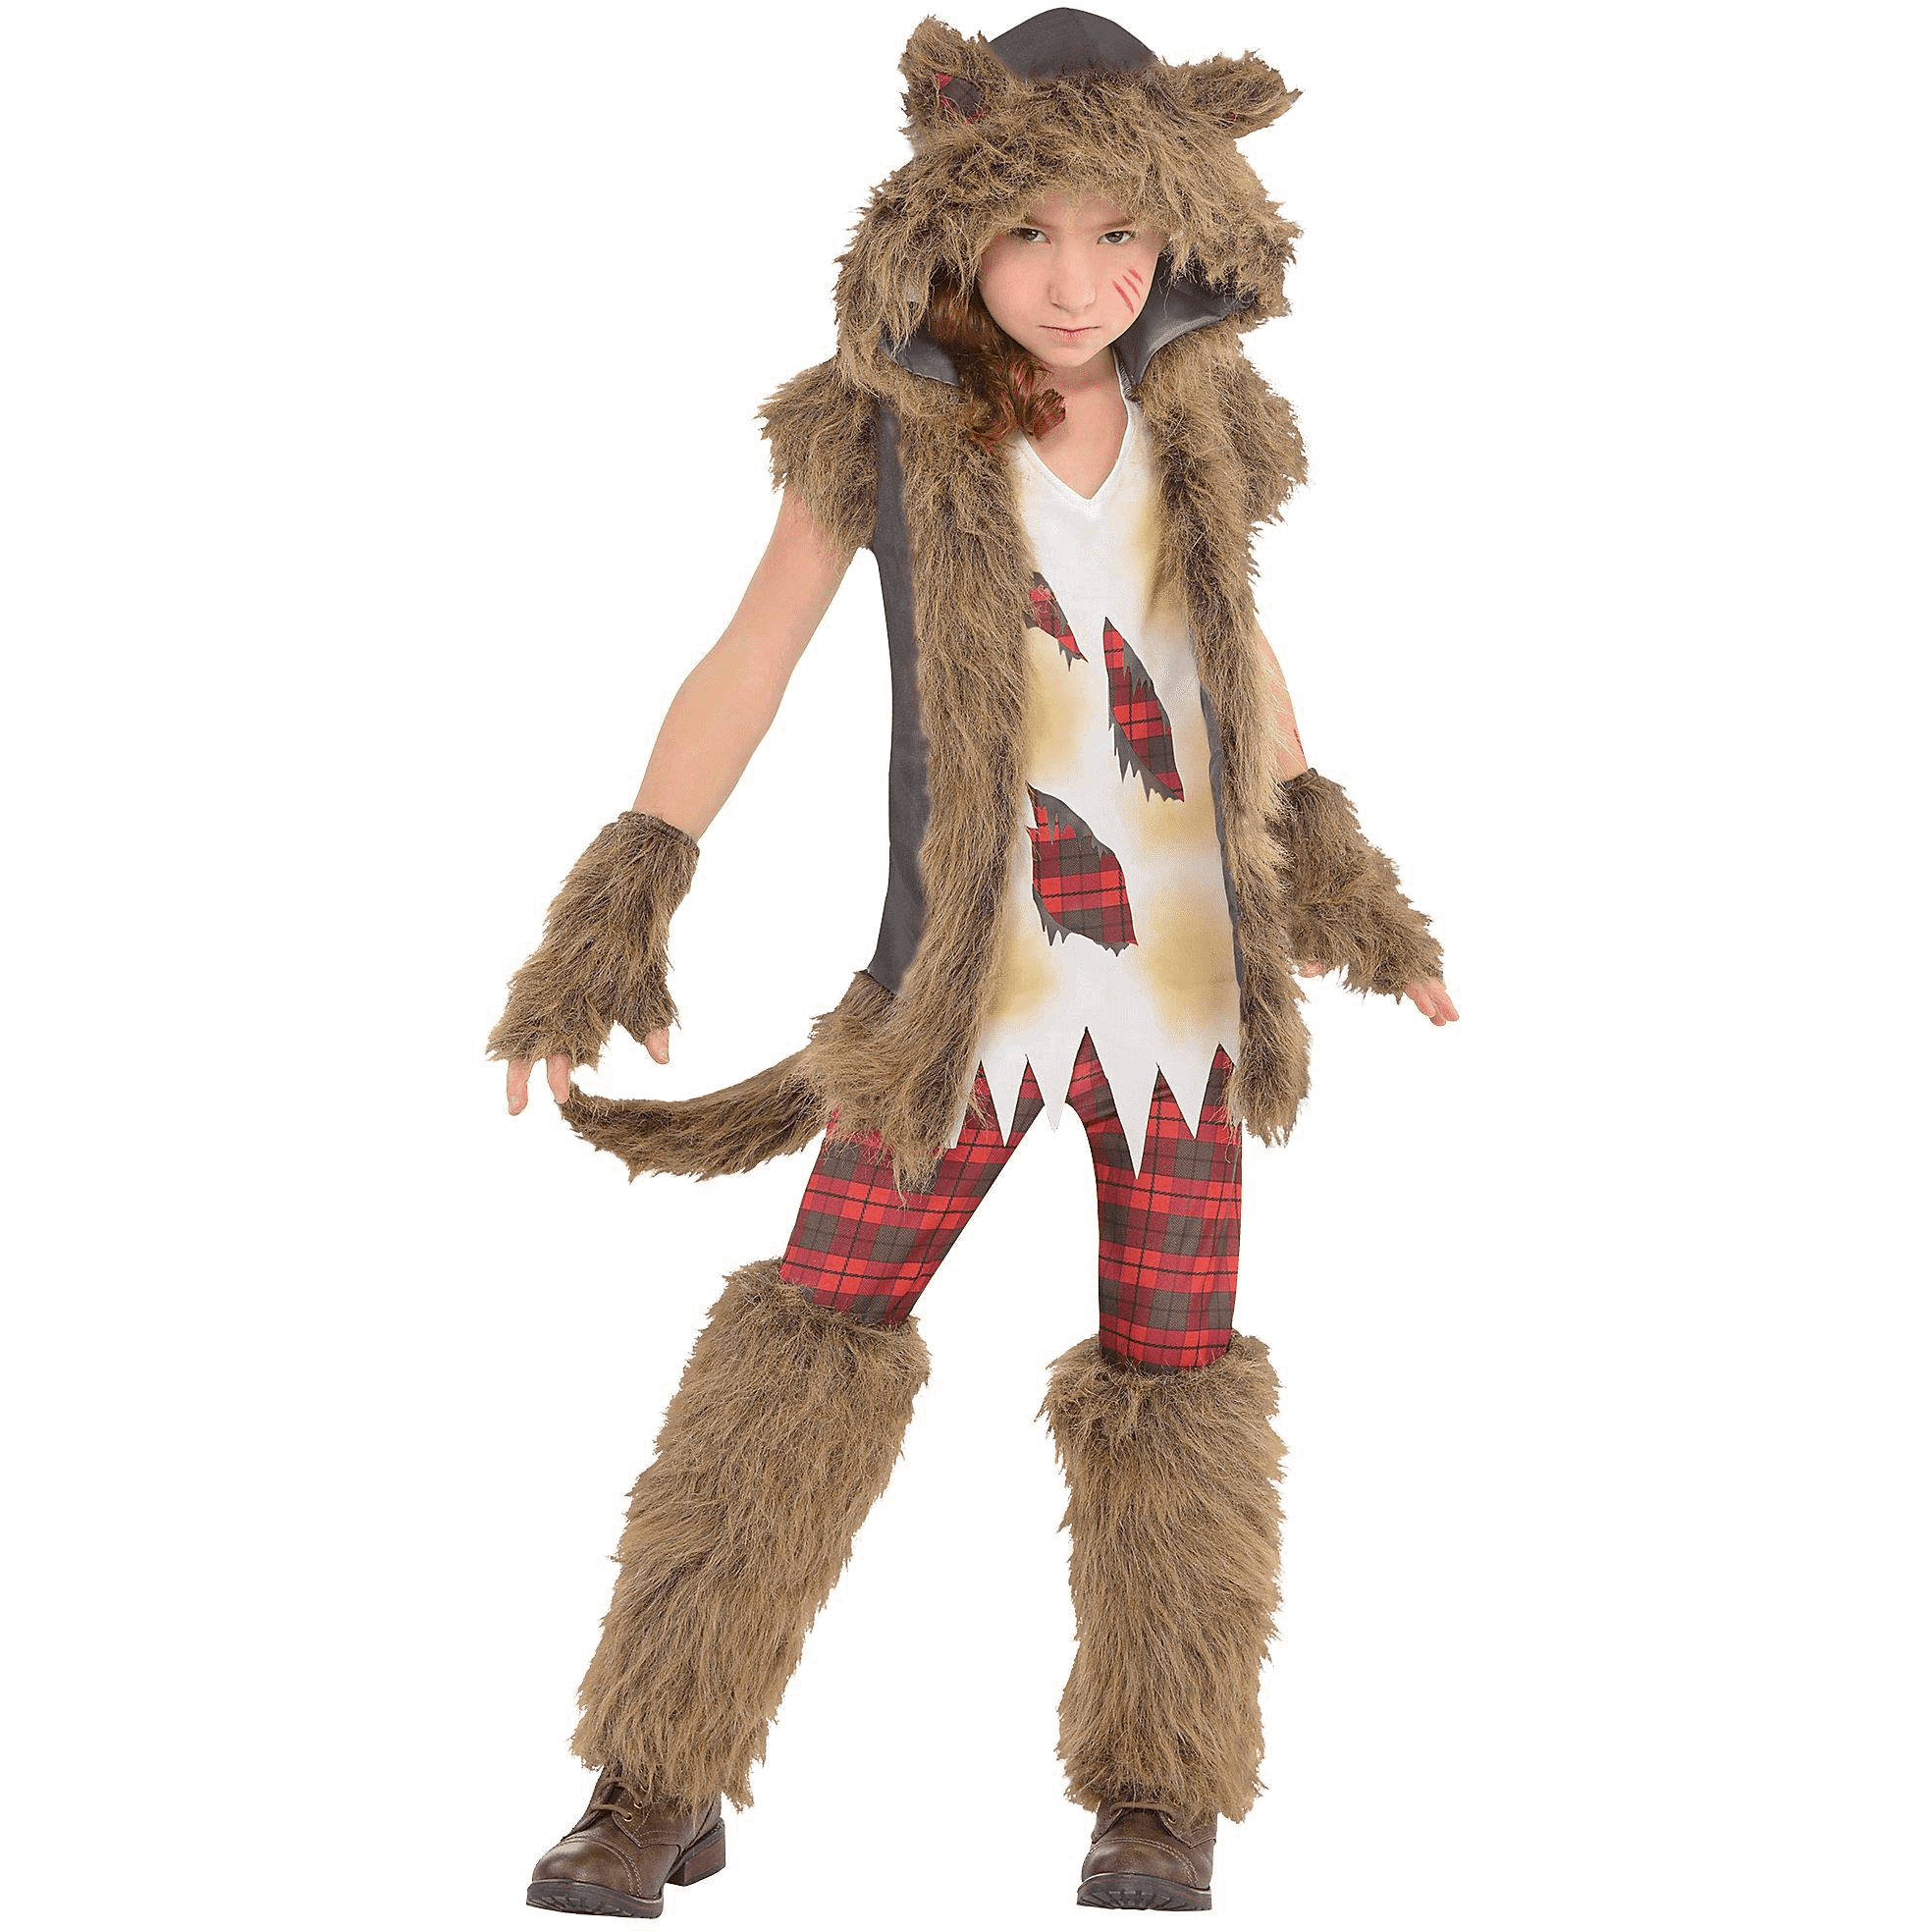 Ultimate Party Super Stores COSTUMES Girls Full Moon Child Costume